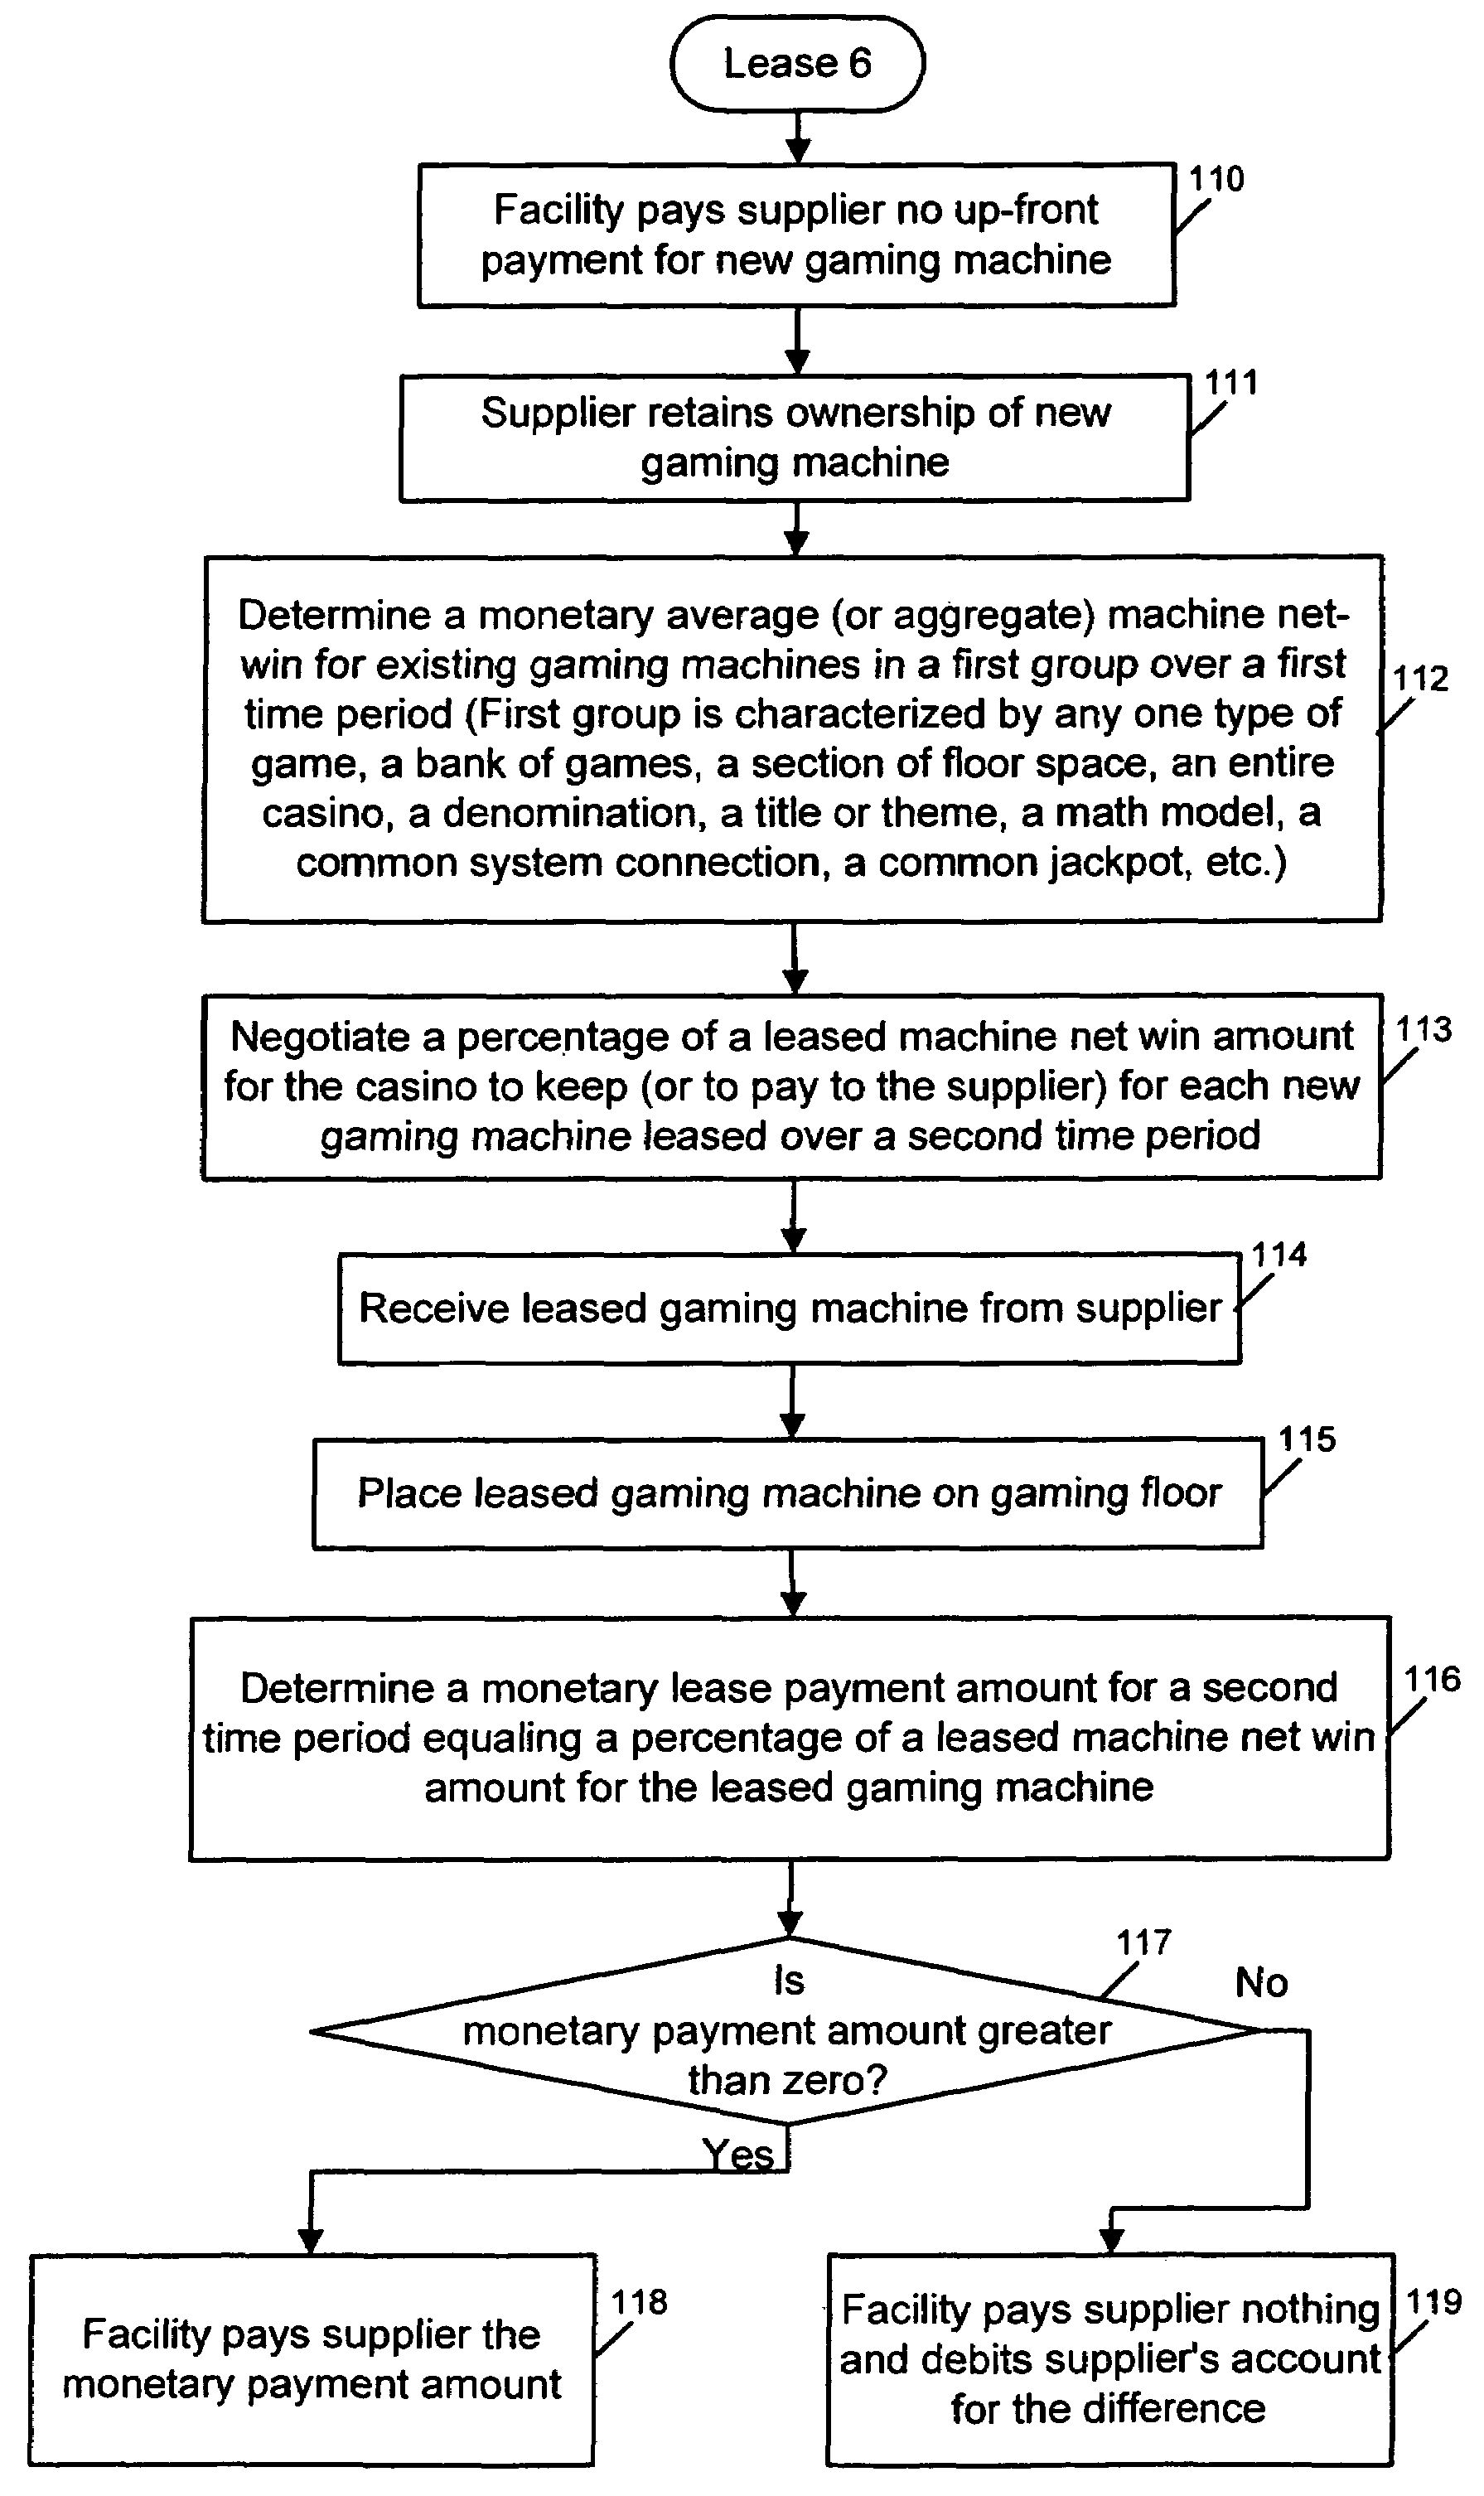 Method of leasing a gaming machine for a percentage of a net win amount